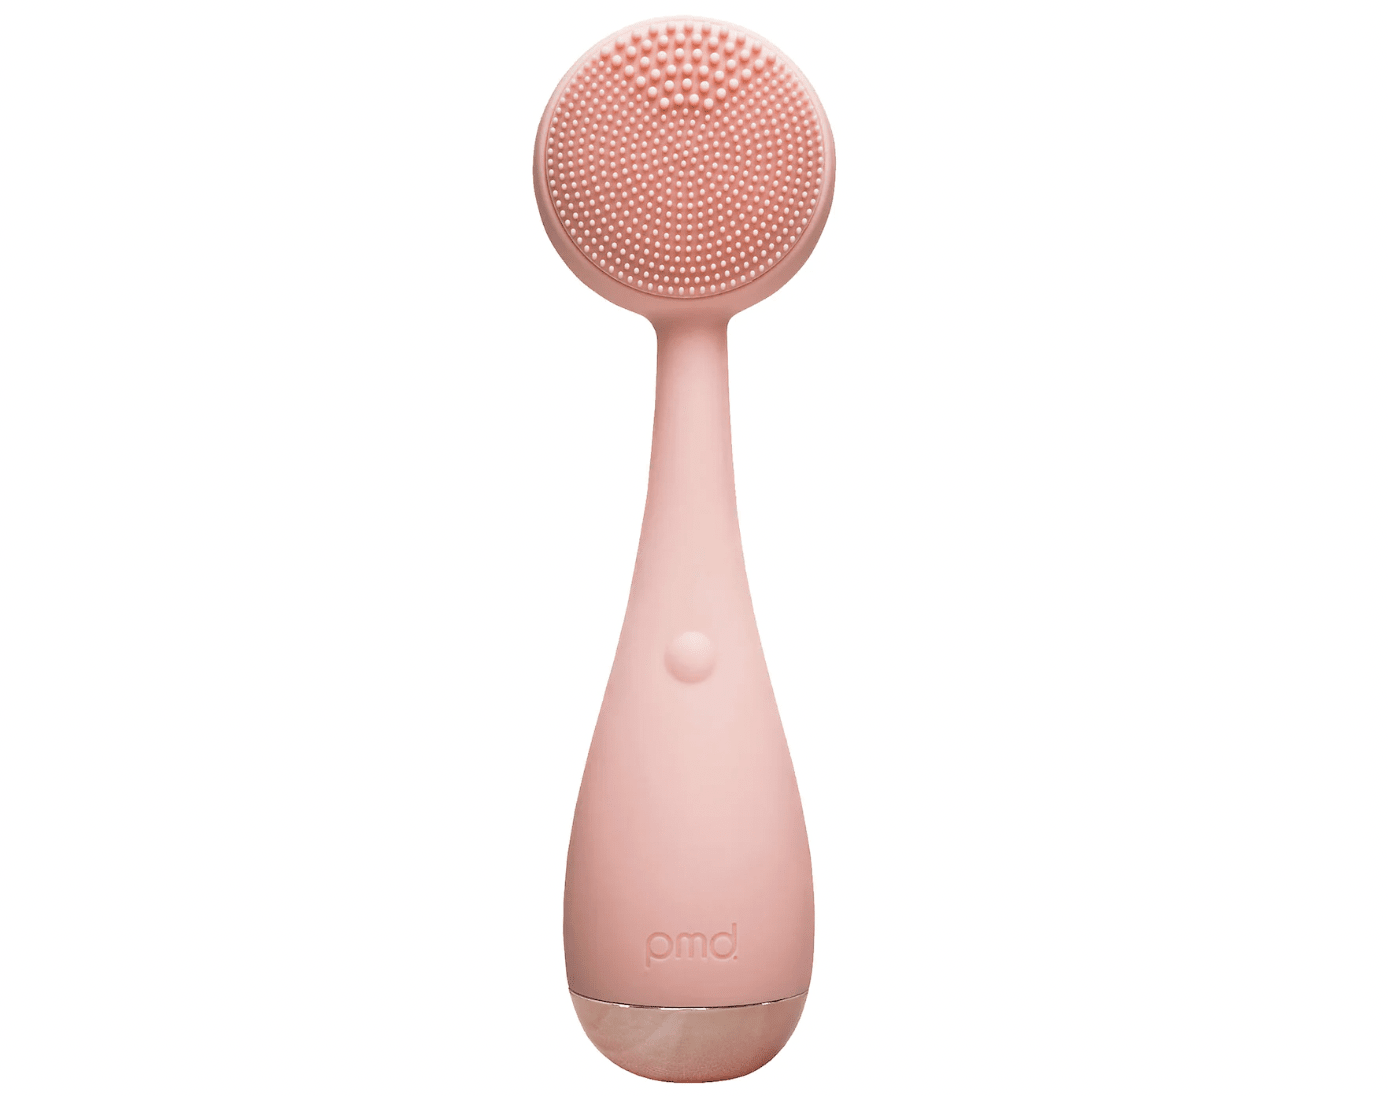 7 Best Facial Cleansing Brushes of 2022 - Face Cleaning Brush Reviews